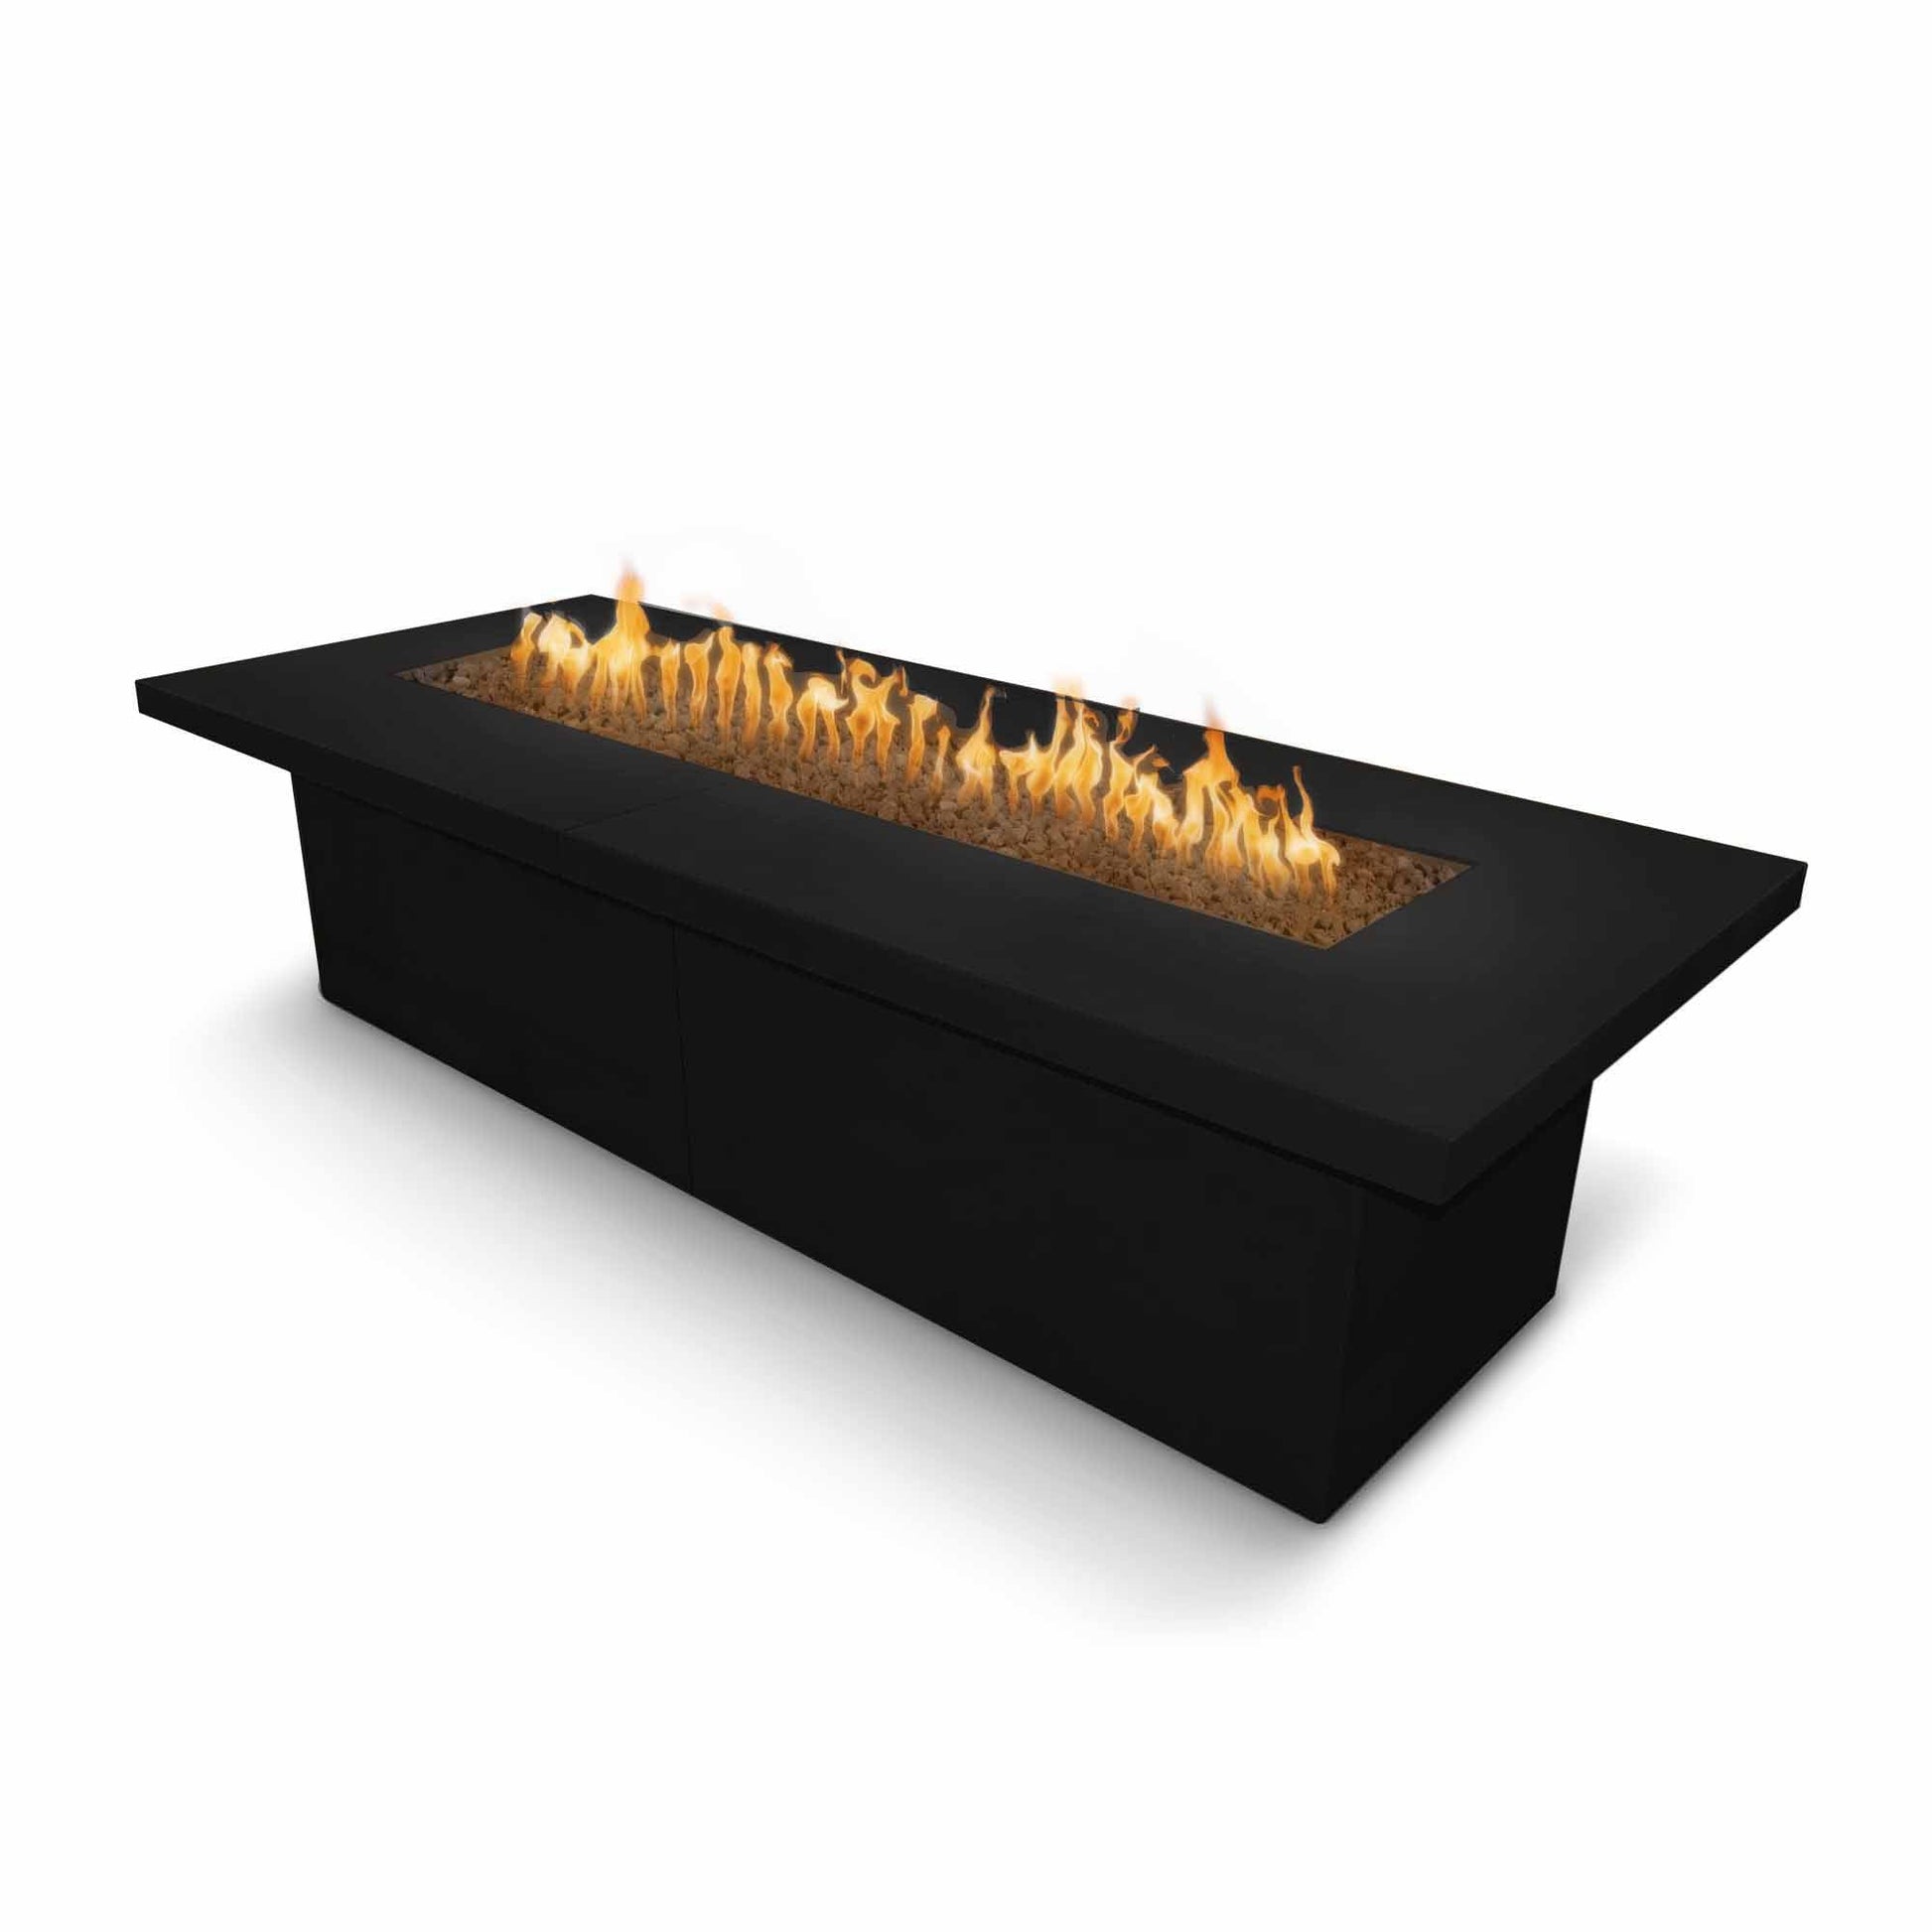 The Outdoor Plus Rectangular Newport 120" Stainless Steel Natural Gas Fire Pit with 110V Electronic Ignition